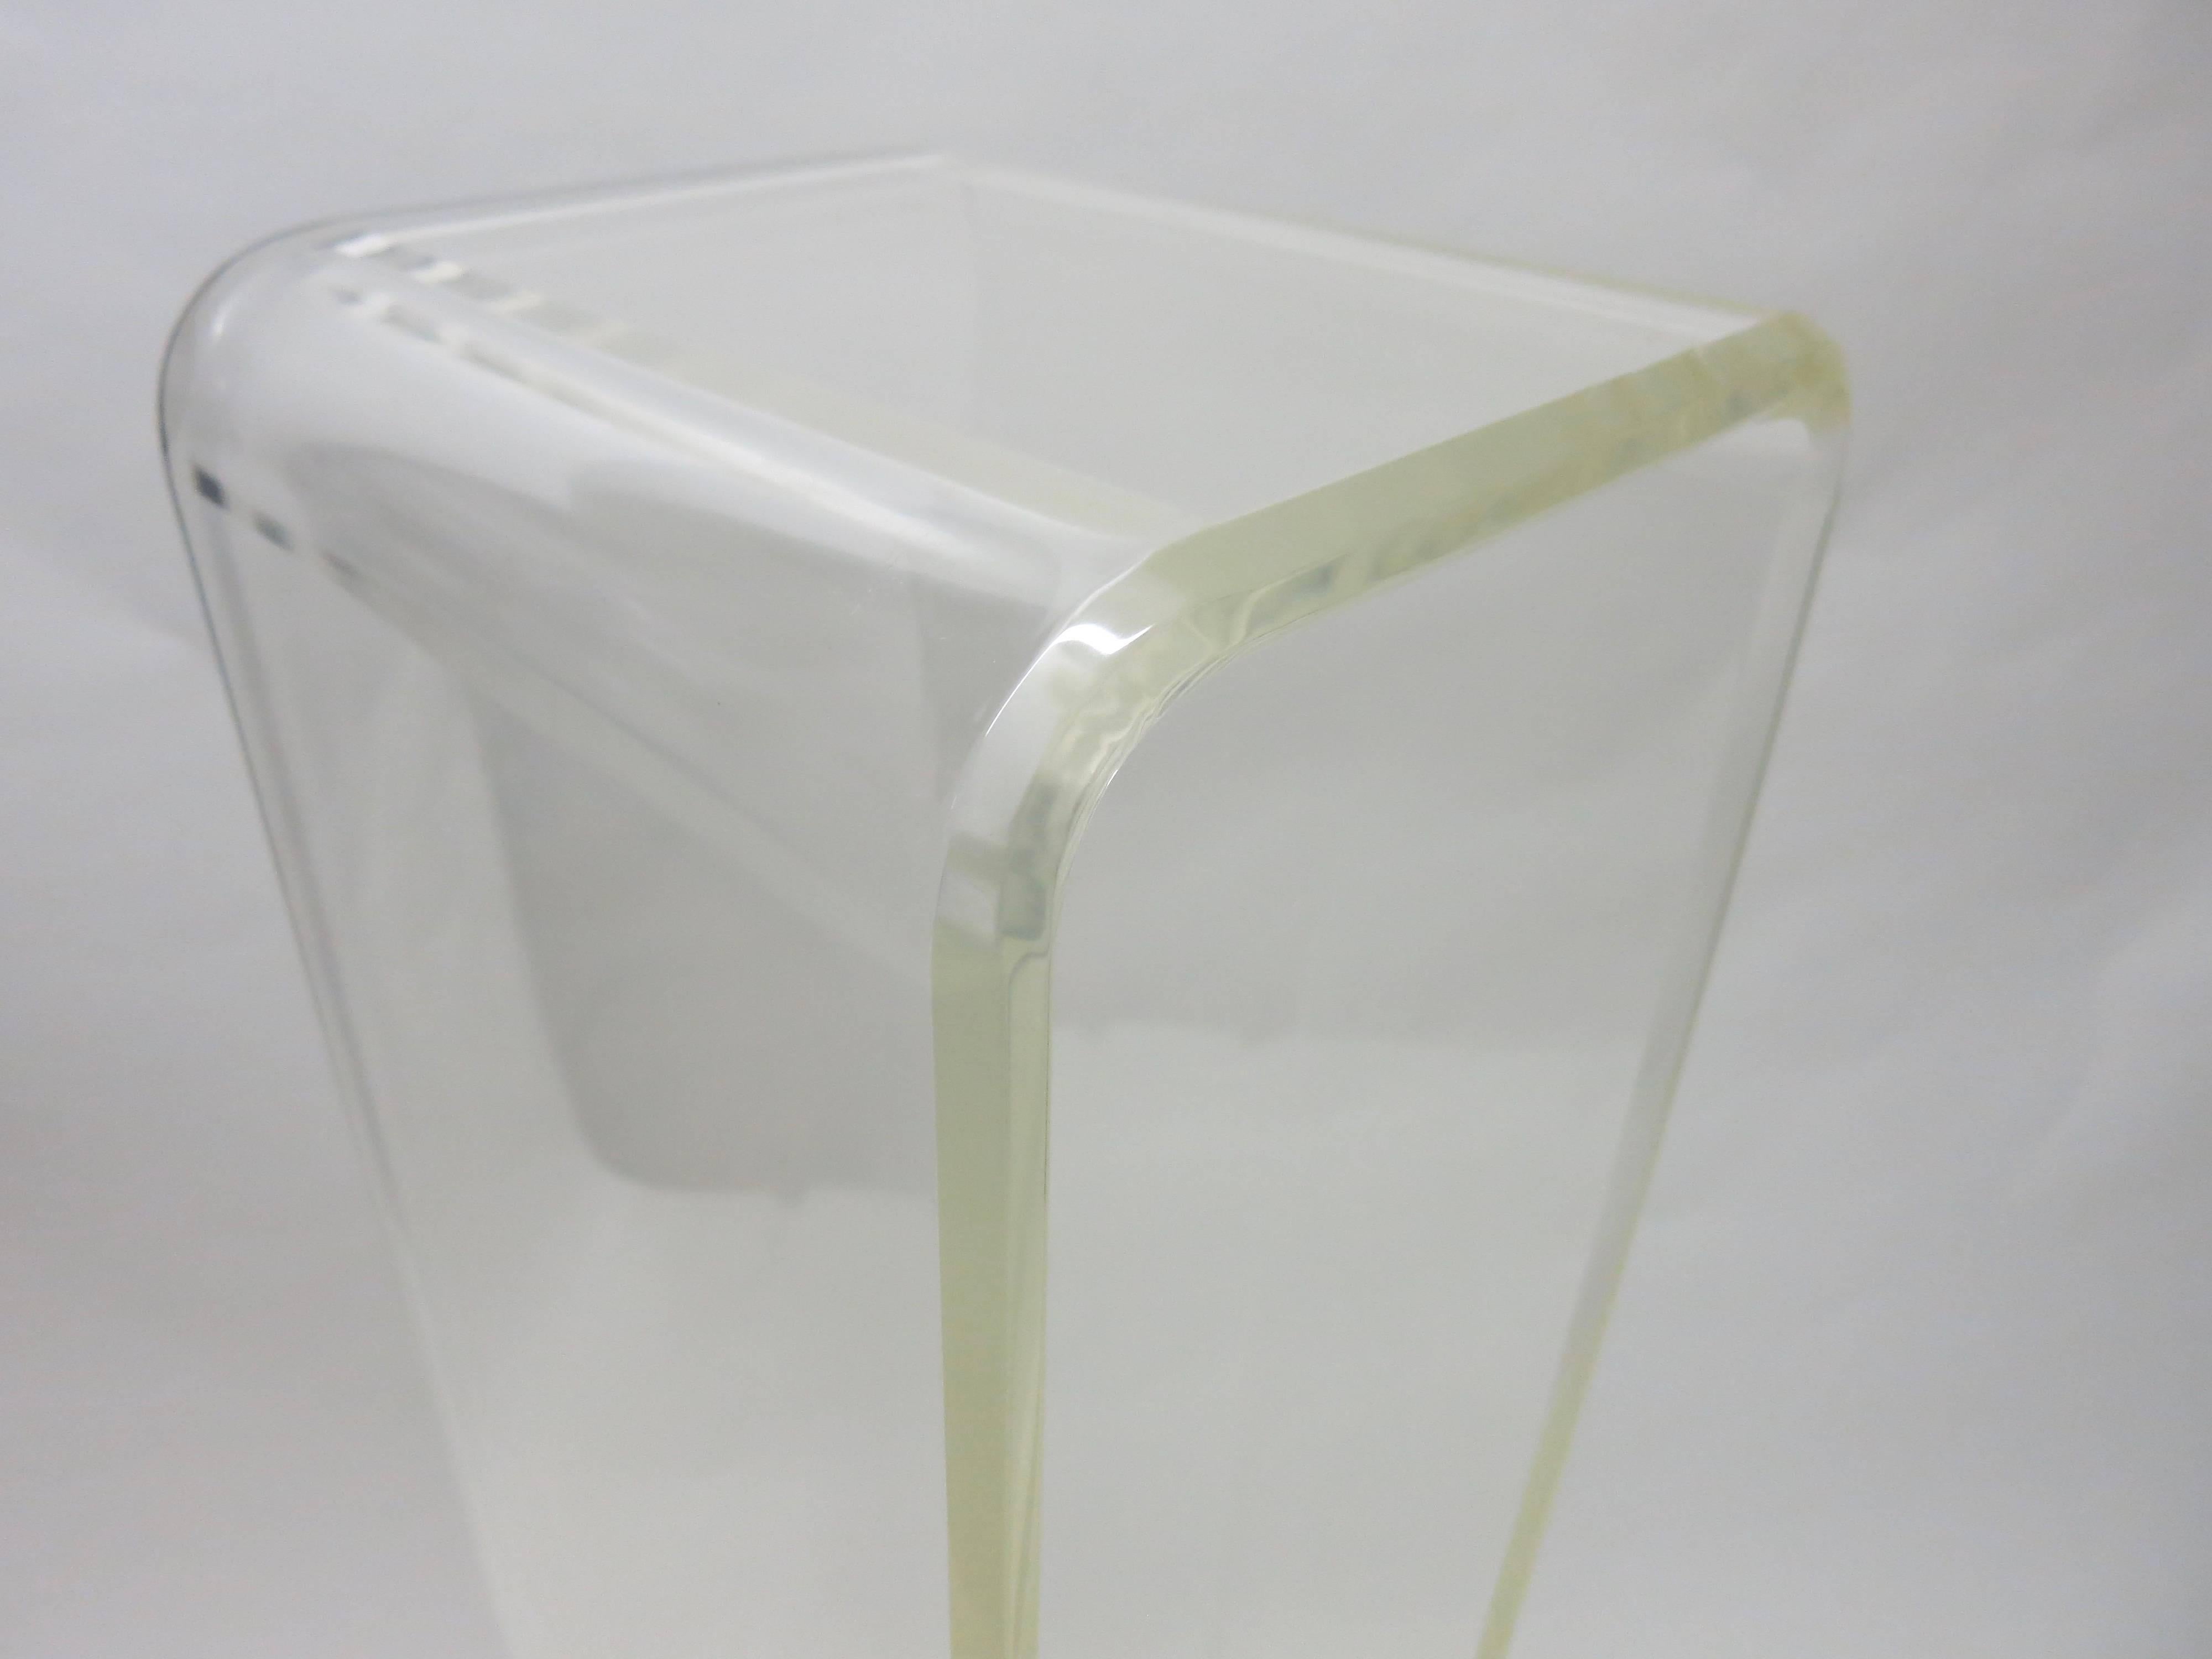 Pedestal made of clear molded Lucite. The flat top is square with rounded ends. The bottom has rounded ends that turn outward to give the pedestal good balance combined with the weight of 3/4 inch thick Lucite make for a stable and strong stance.